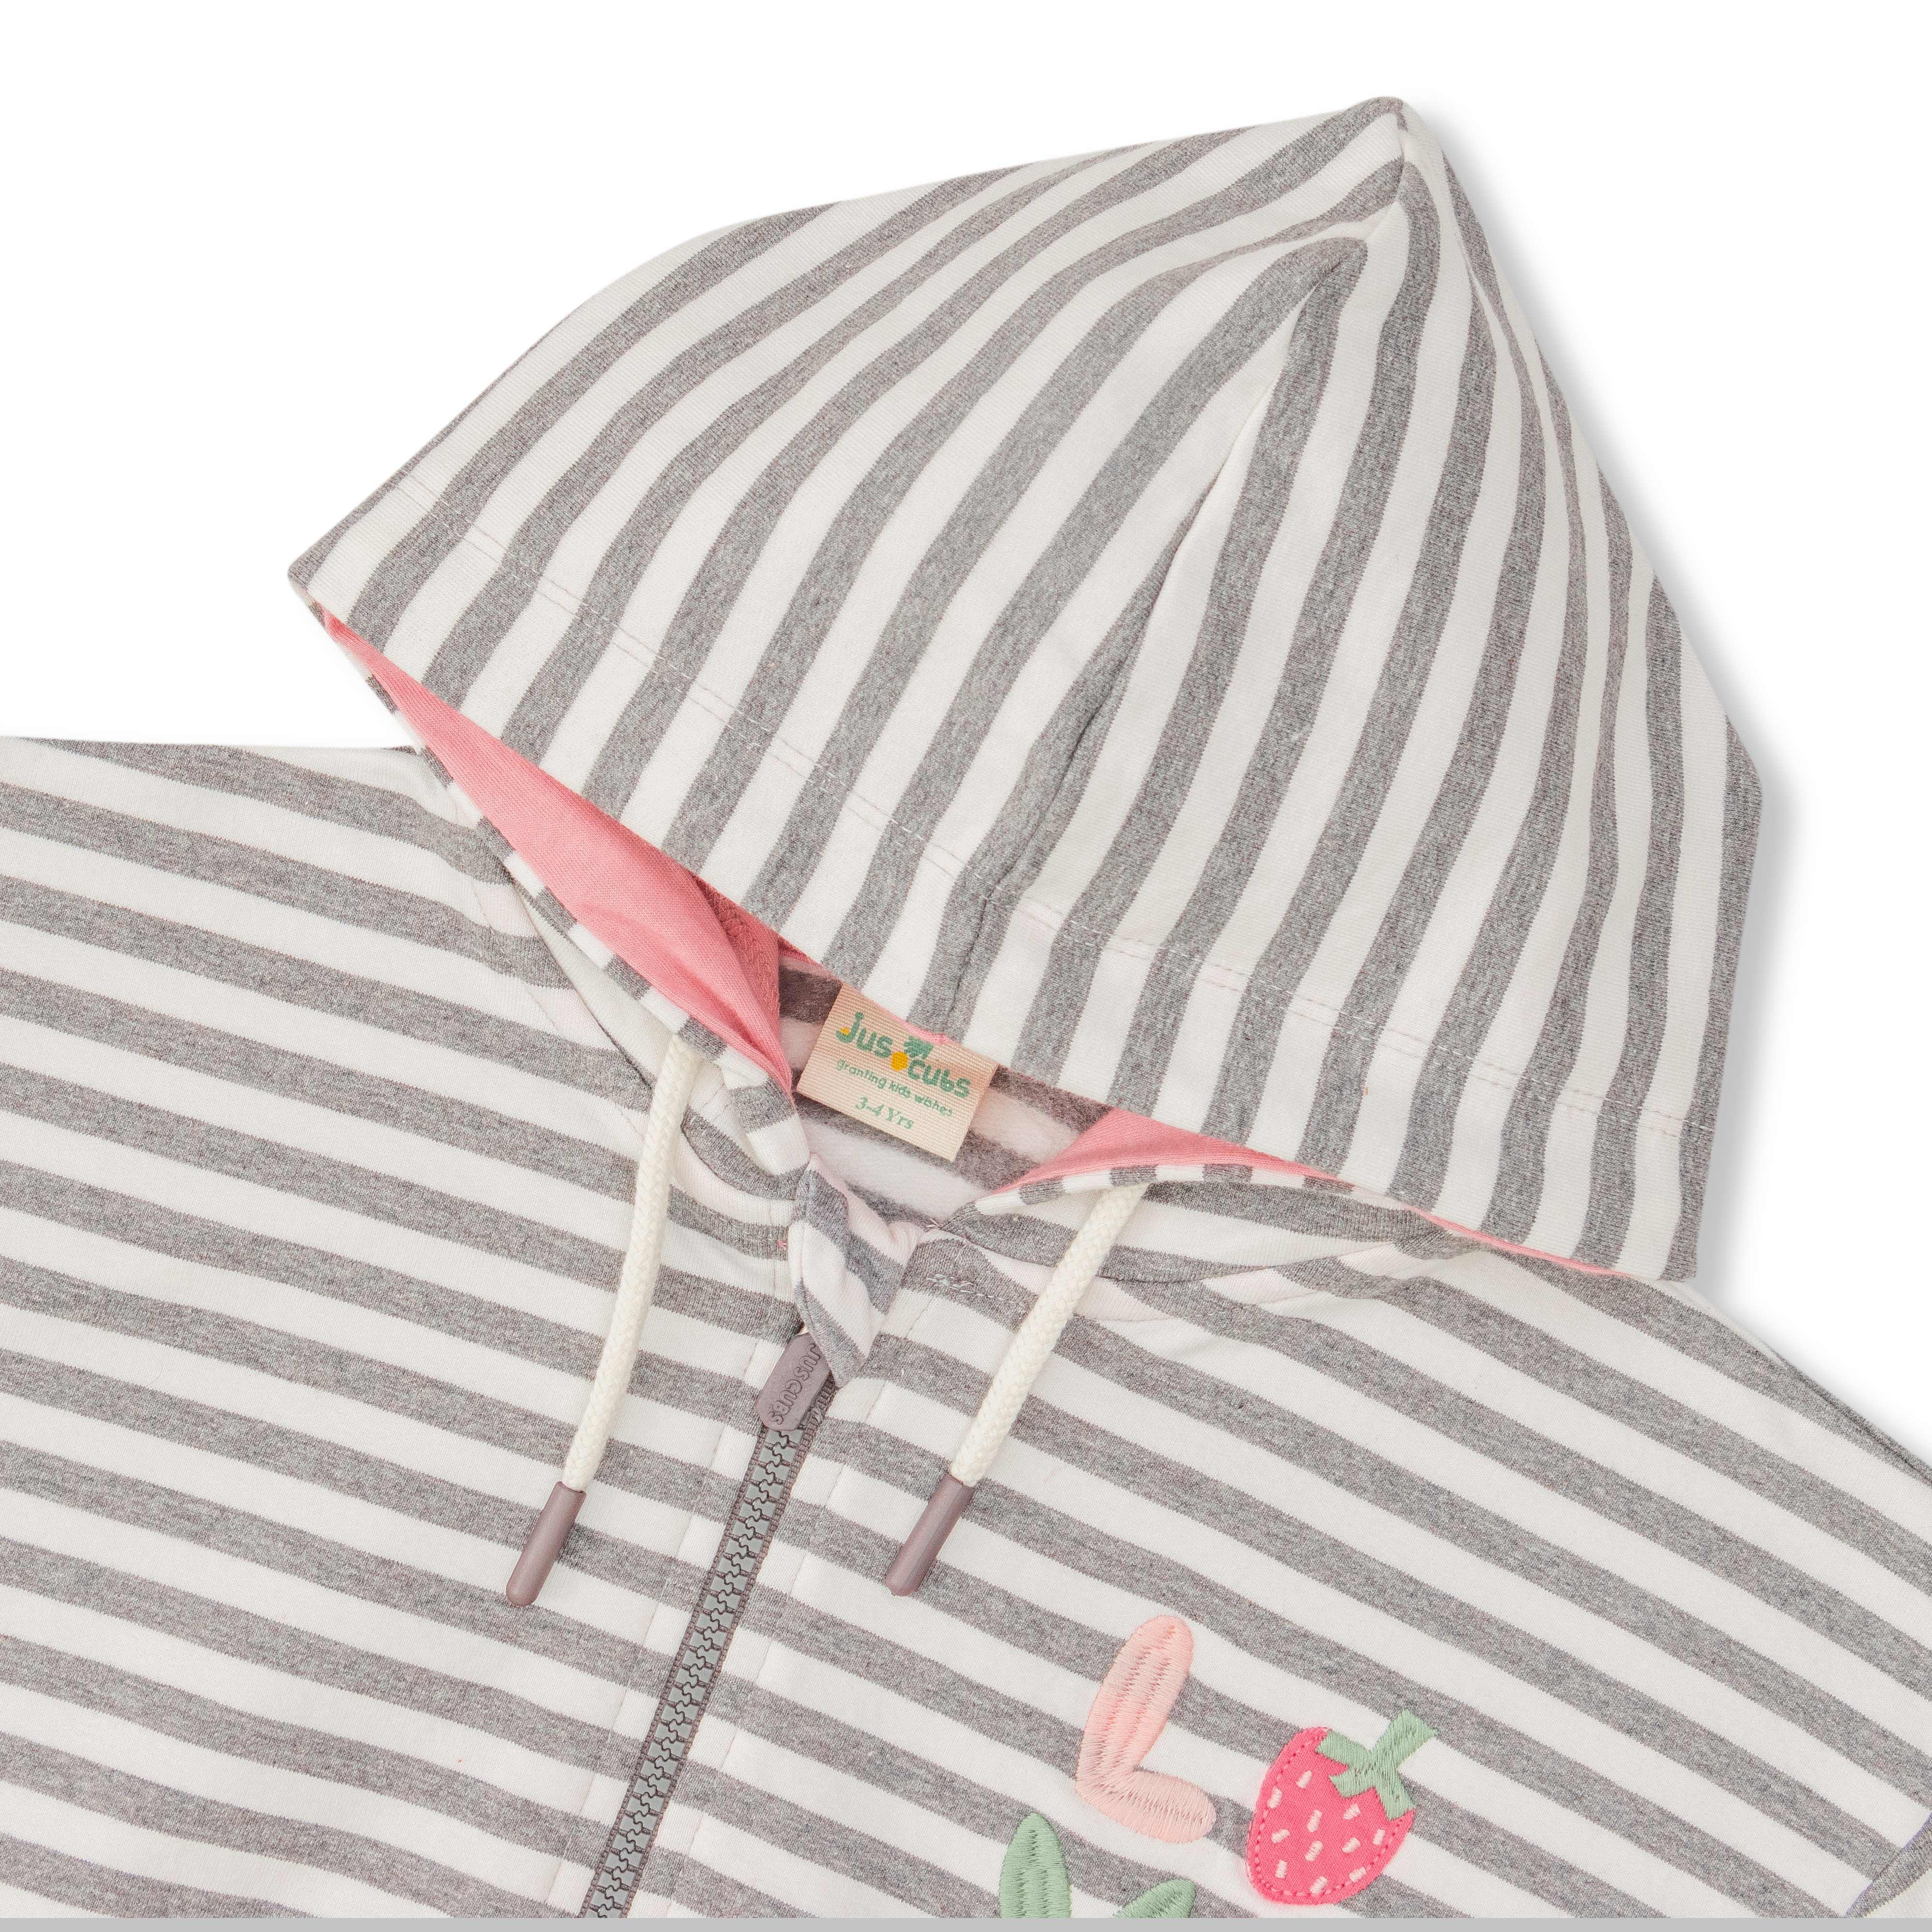 Baby Girls Stiped & Love Embroidery Hoodie - Juscubs